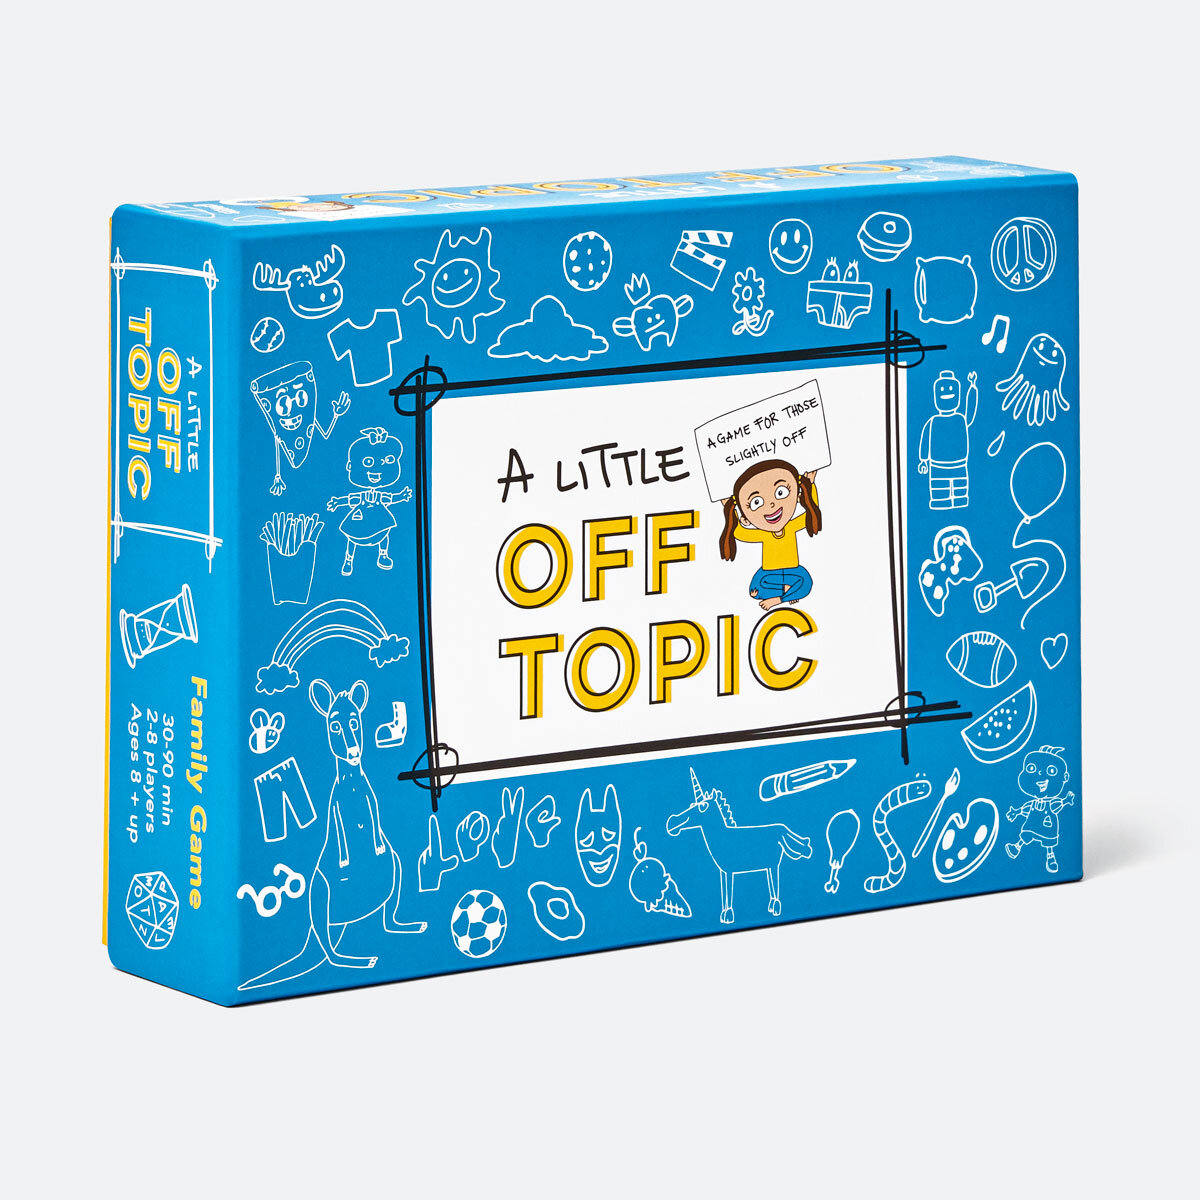 HOW TO PLAY OFF TOPIC GAME 